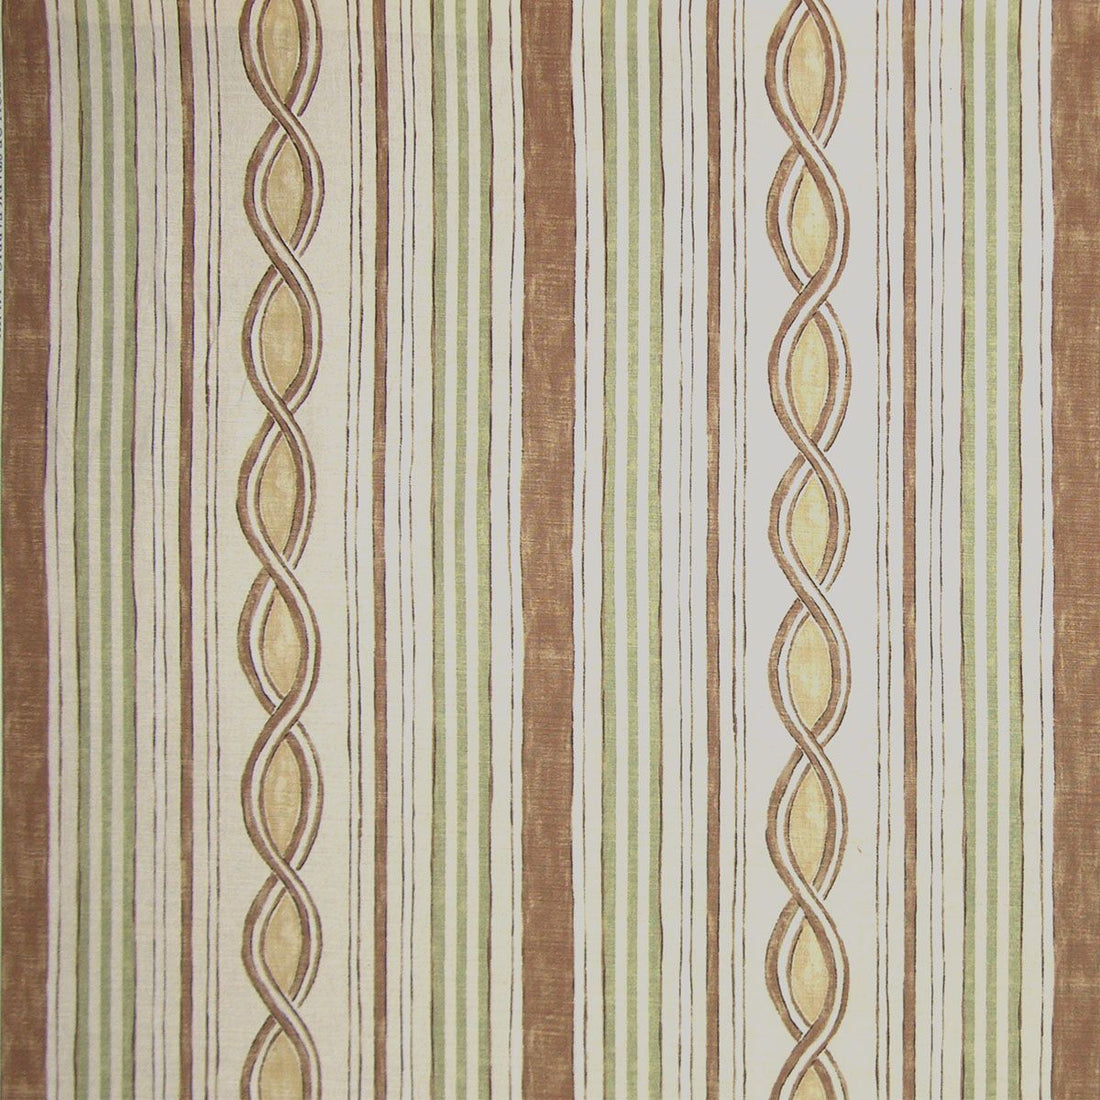 Grafton Stripe fabric in brown green color - pattern number CN 0003AL03 - by Scalamandre in the Old World Weavers collection